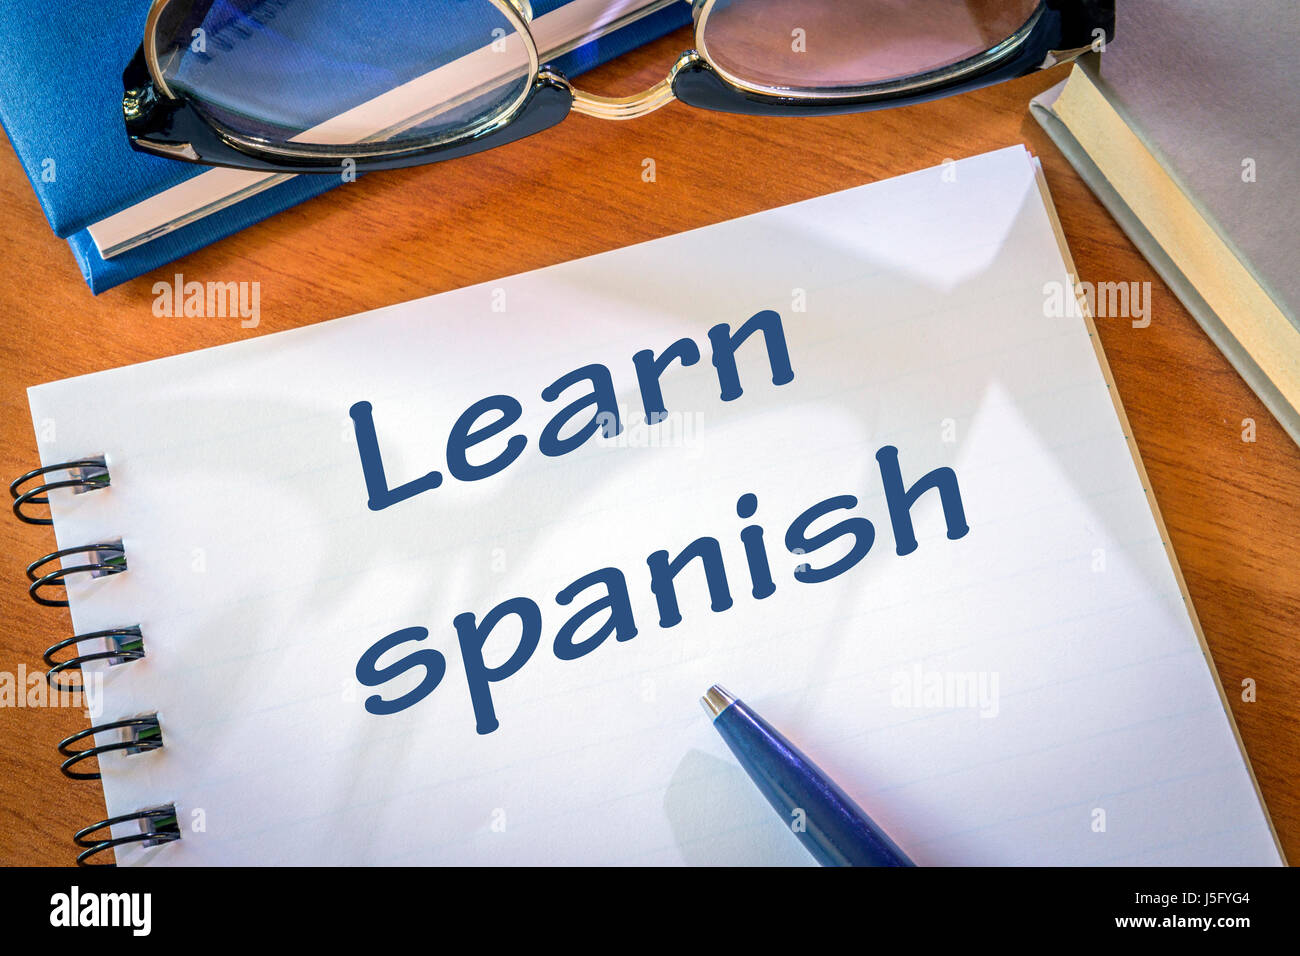 Learn spanish written in a notepad. Education concept Stock Photo